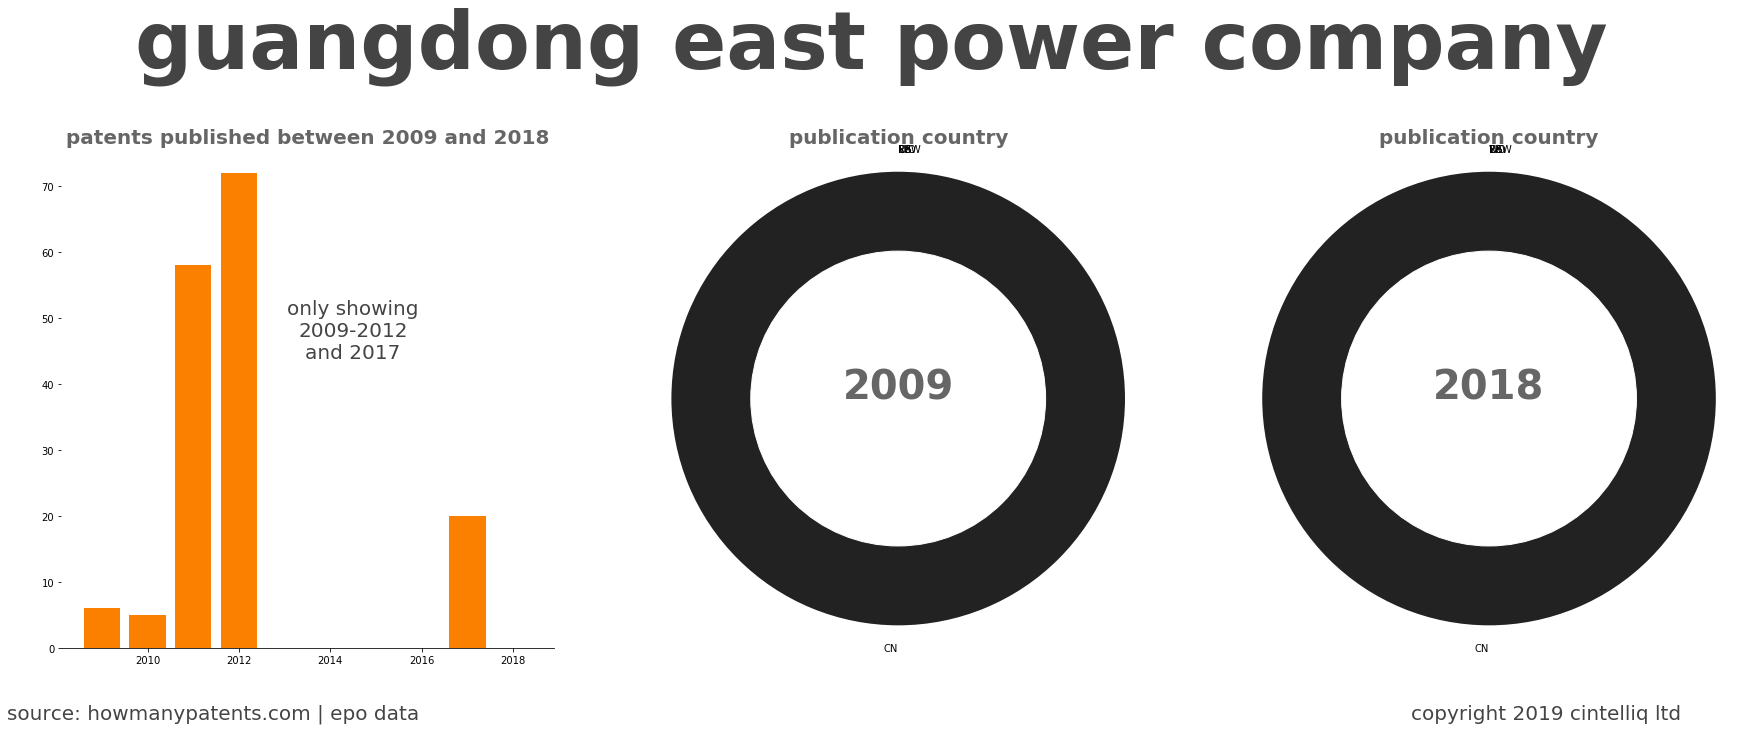 summary of patents for Guangdong East Power Company